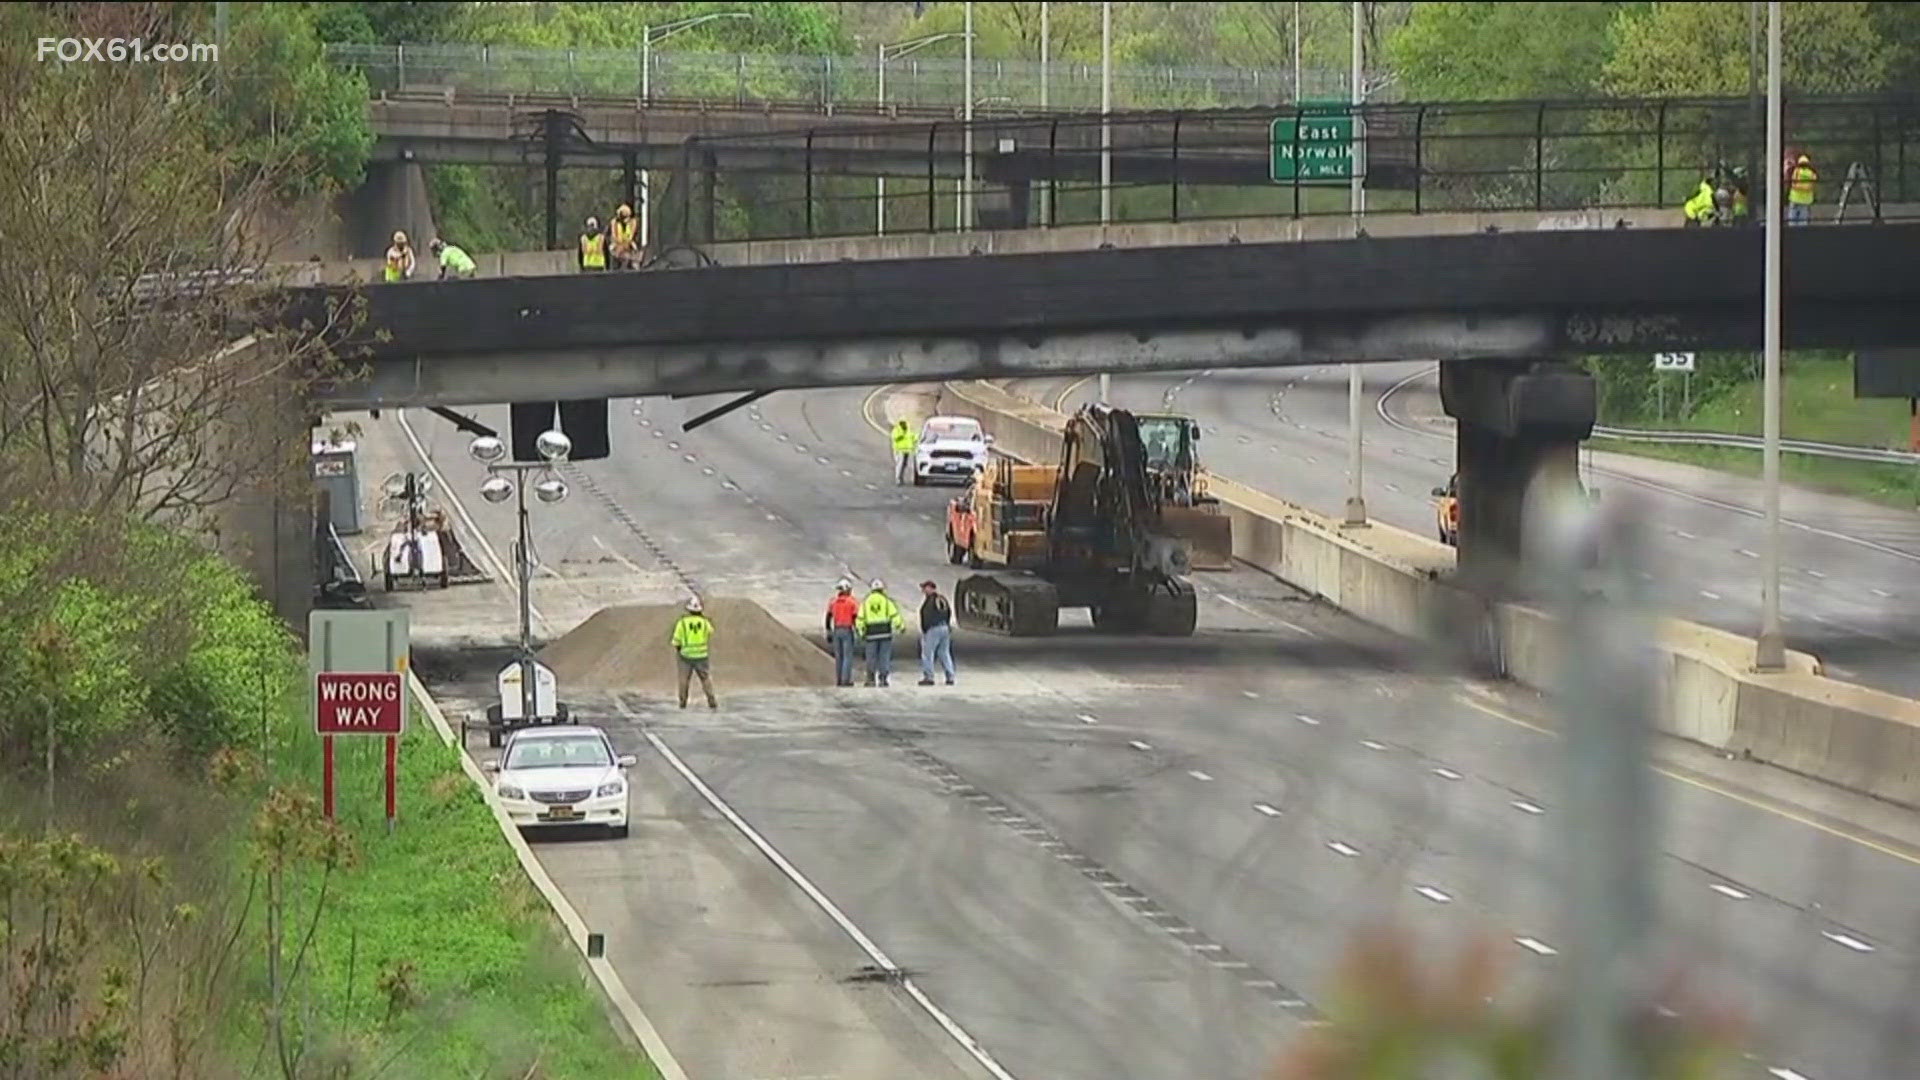 While crews work to demolish the heavily damaged overpass, both sides of I-95 will be closed in Norwalk.